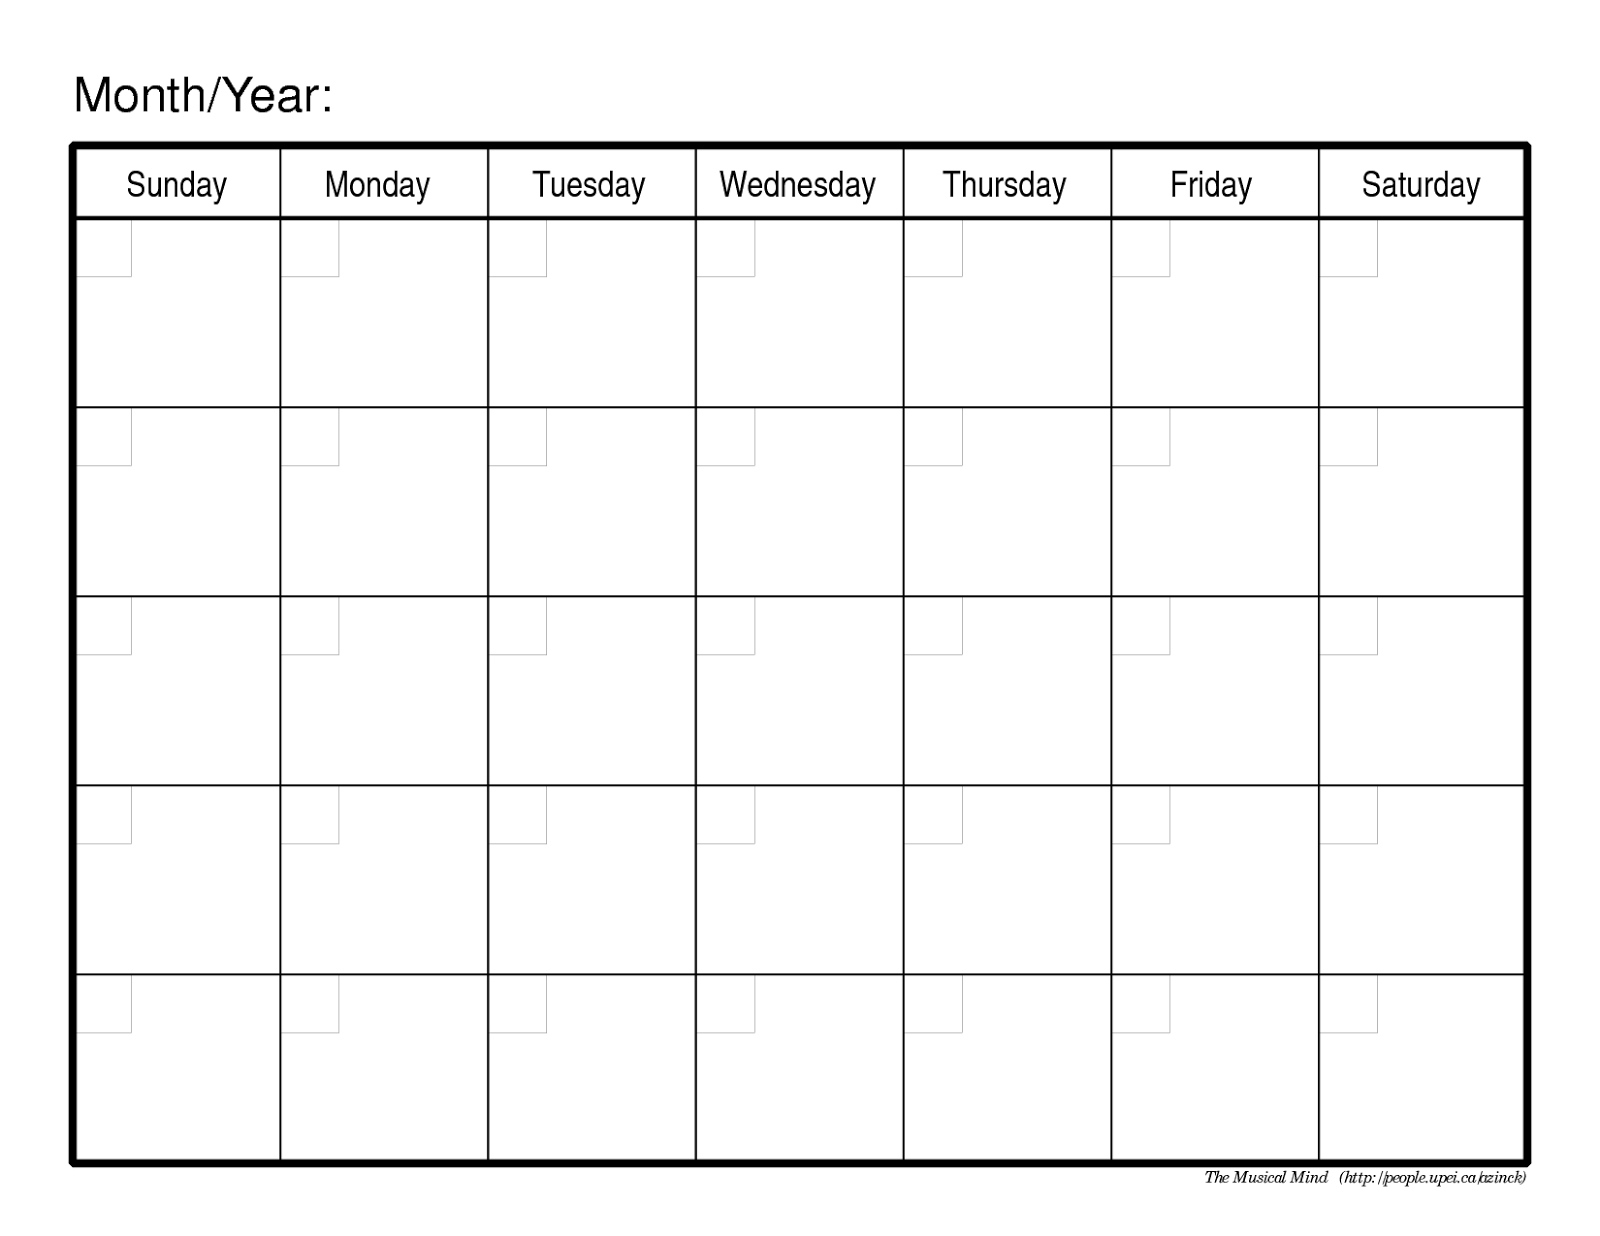 Monthly Calendar No Dates – Printable Month Calendar Blank Calenders With No Dates